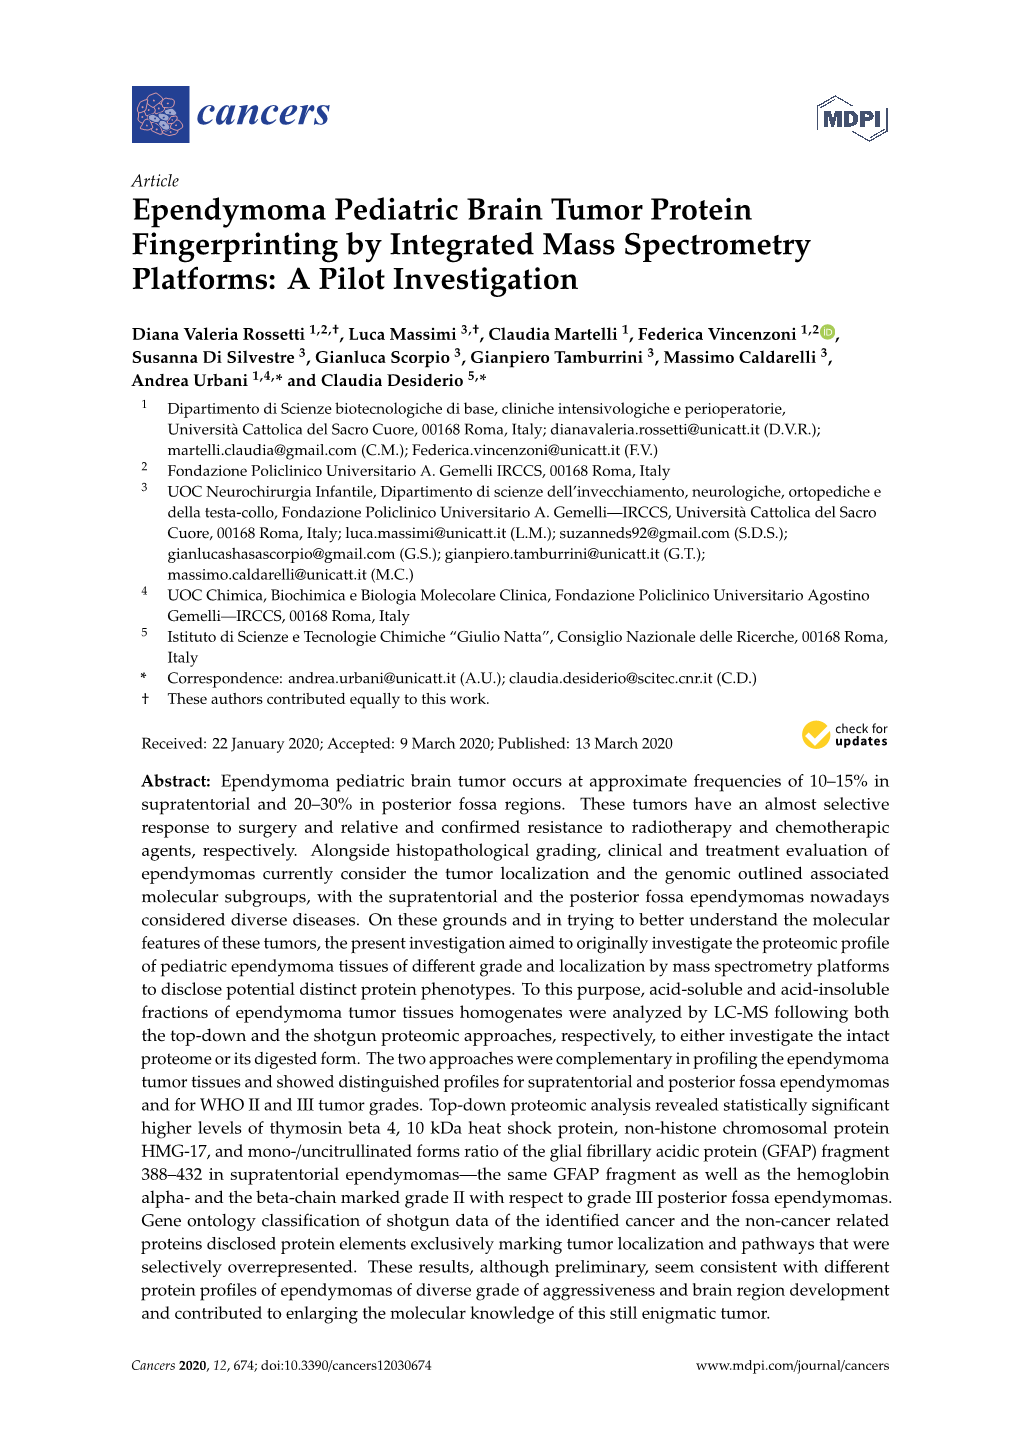 Ependymoma Pediatric Brain Tumor Protein Fingerprinting by Integrated Mass Spectrometry Platforms: a Pilot Investigation